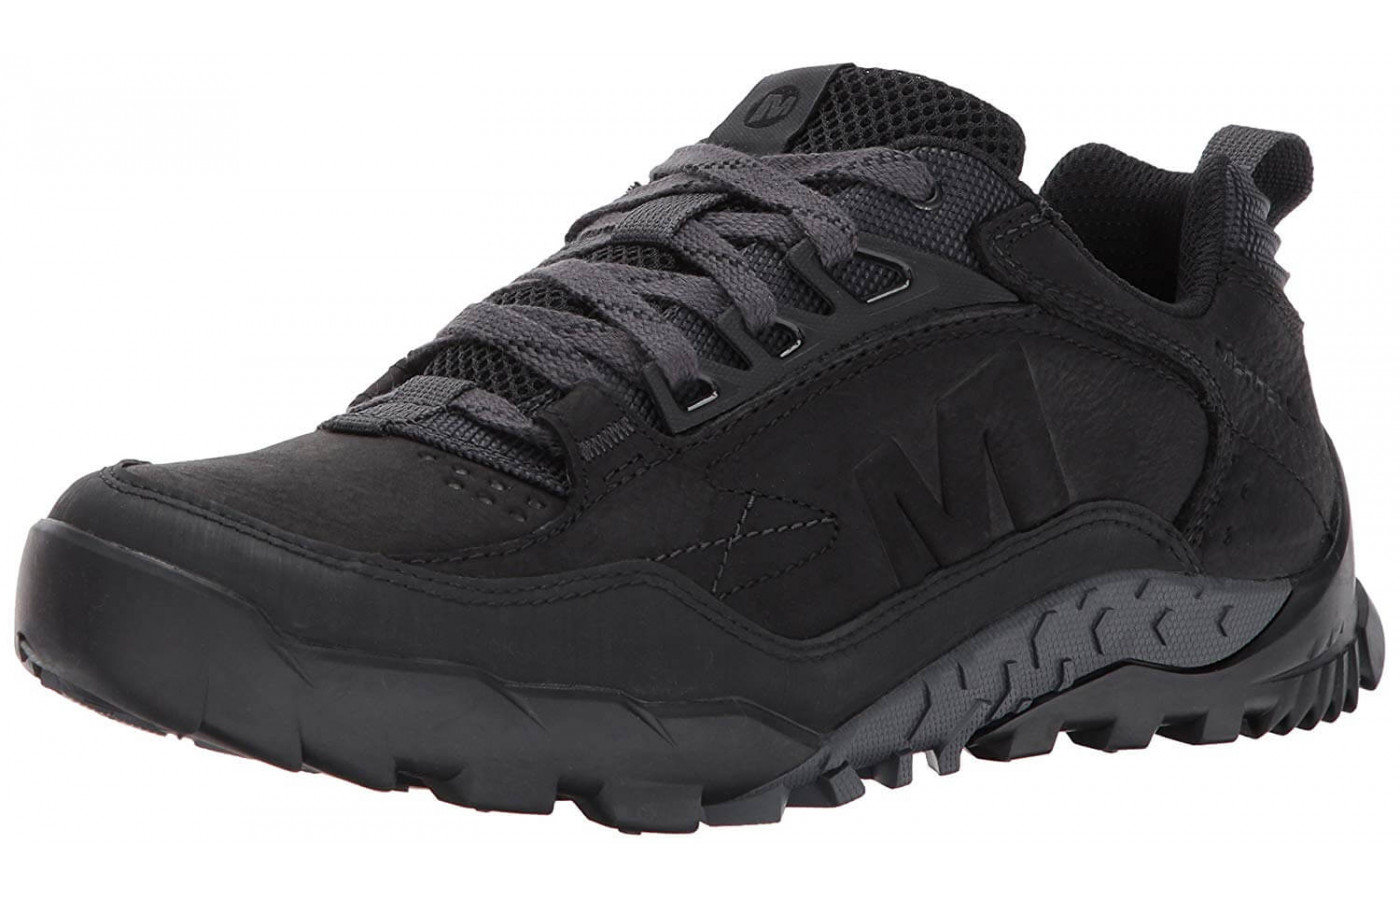 The Merrell Men's Annex Trak Low Shoe will support the foot